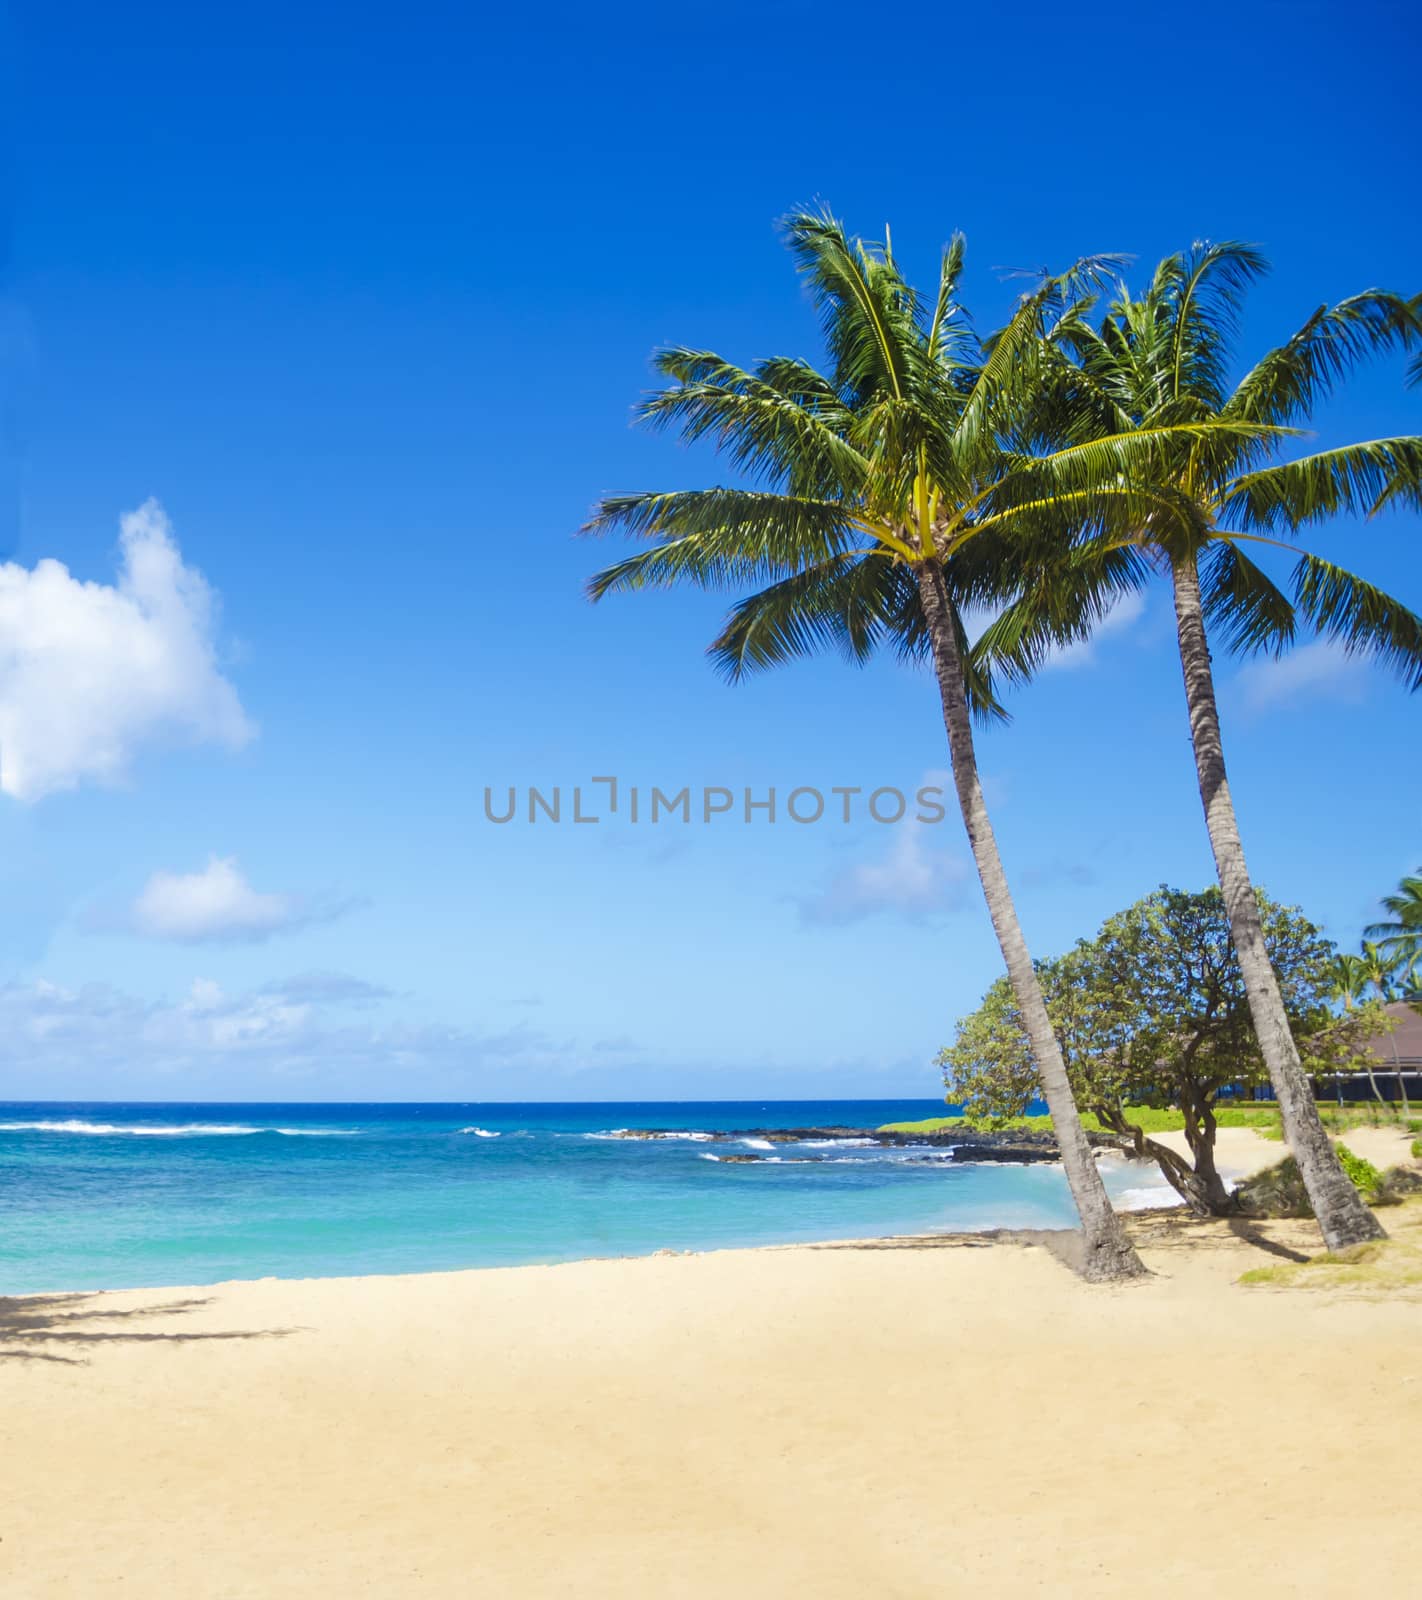 Palm trees on the sandy beach in Hawaii by EllenSmile